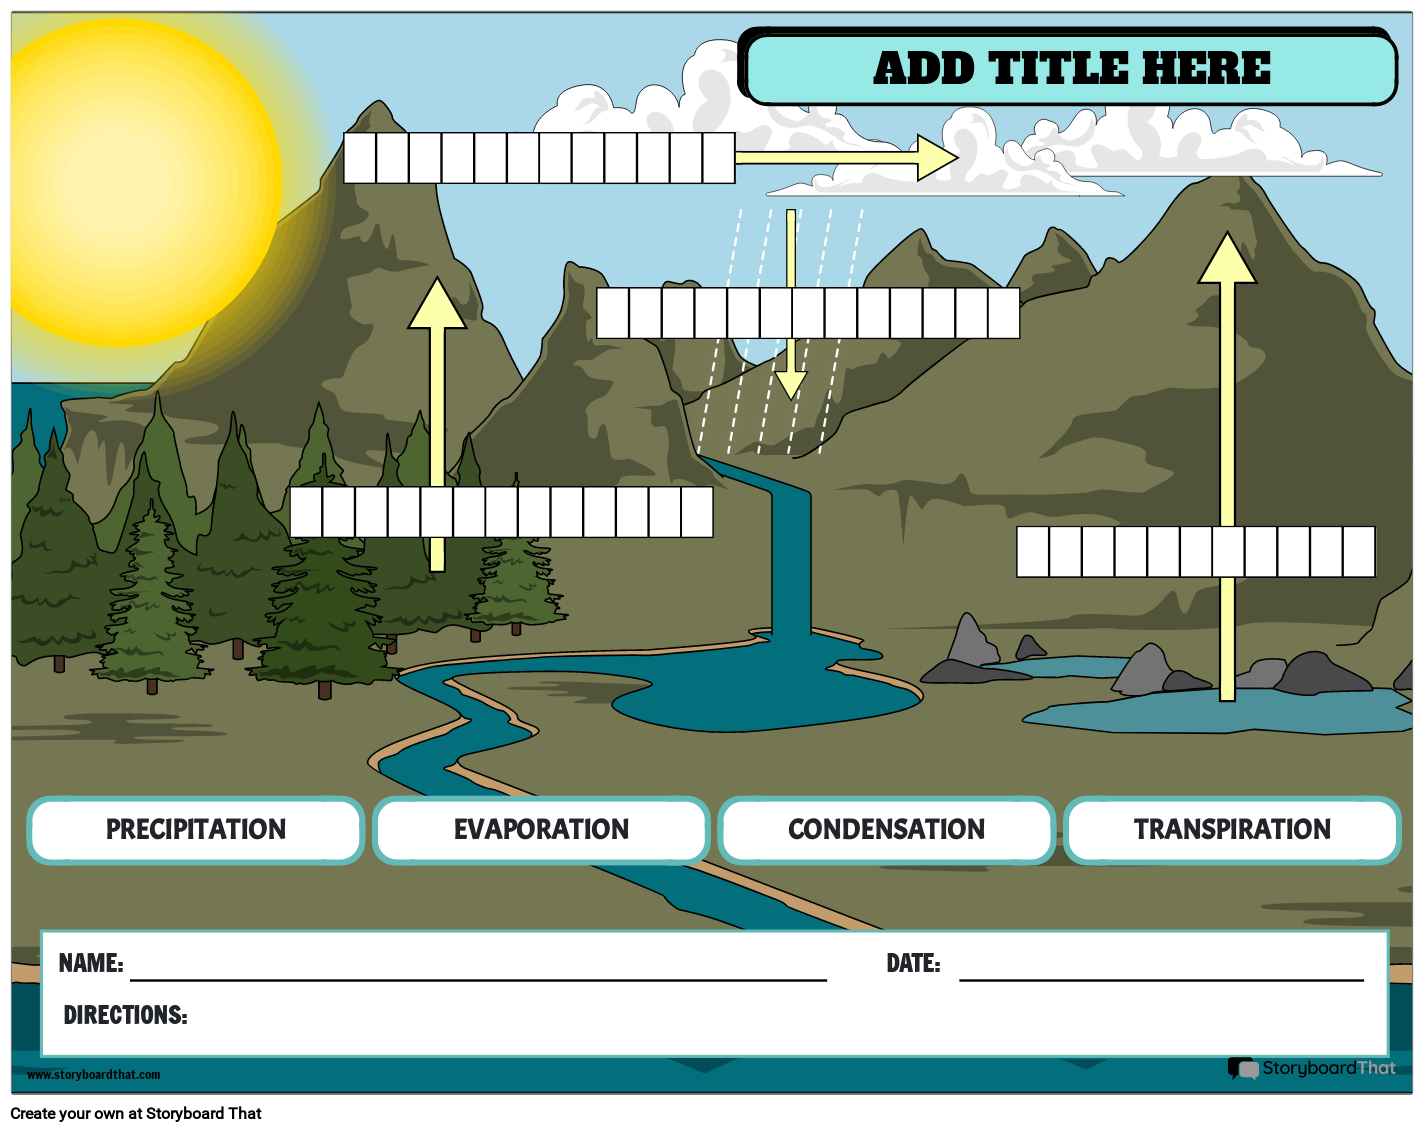 Label the Water Cycle